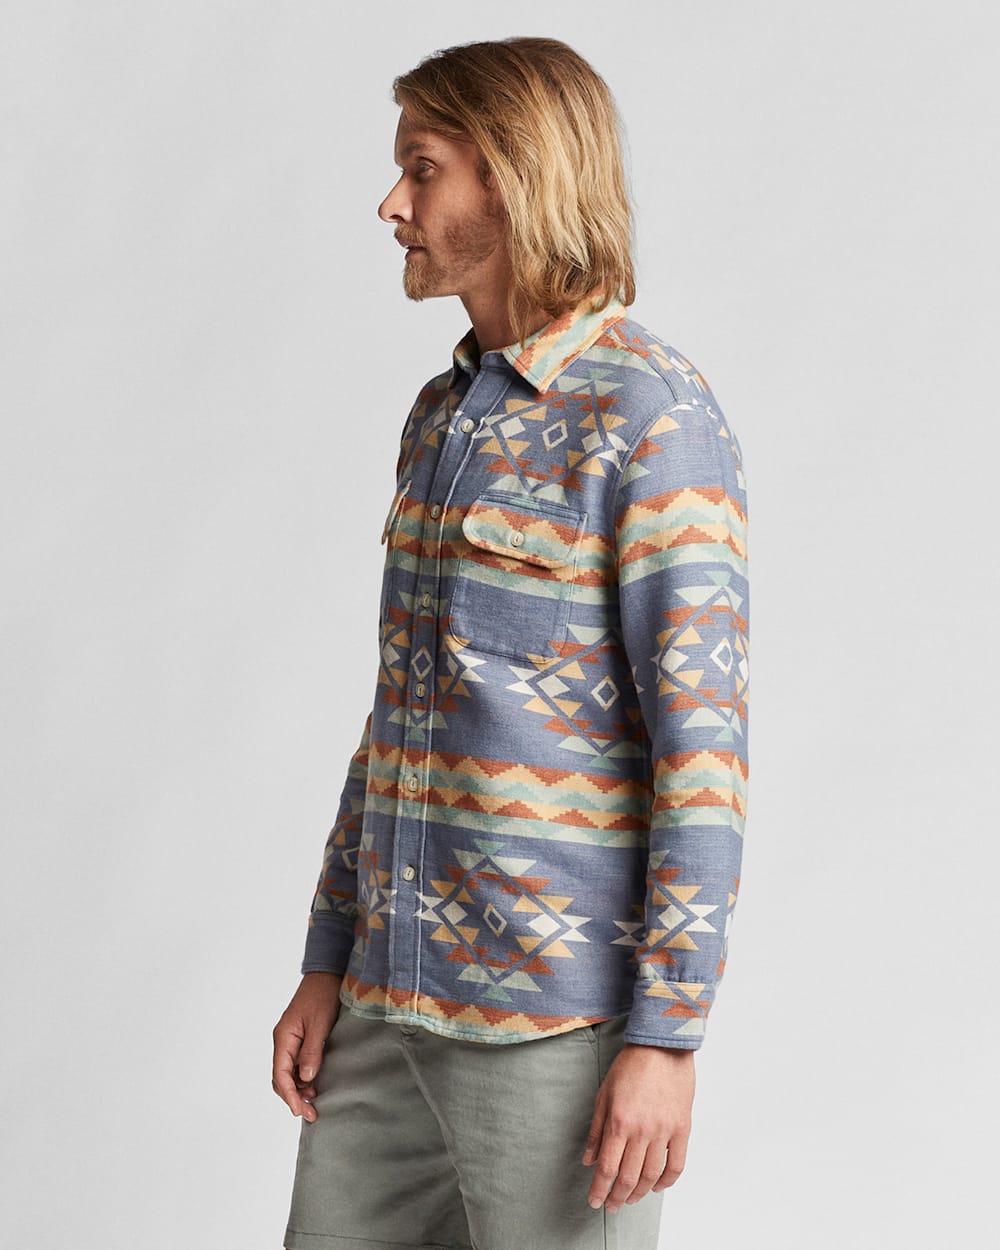 ALTERNATE VIEW OF MEN'S BEACH SHACK JACQUARD COTTON SHIRT IN BLUE/GREEN MULTI image number 4